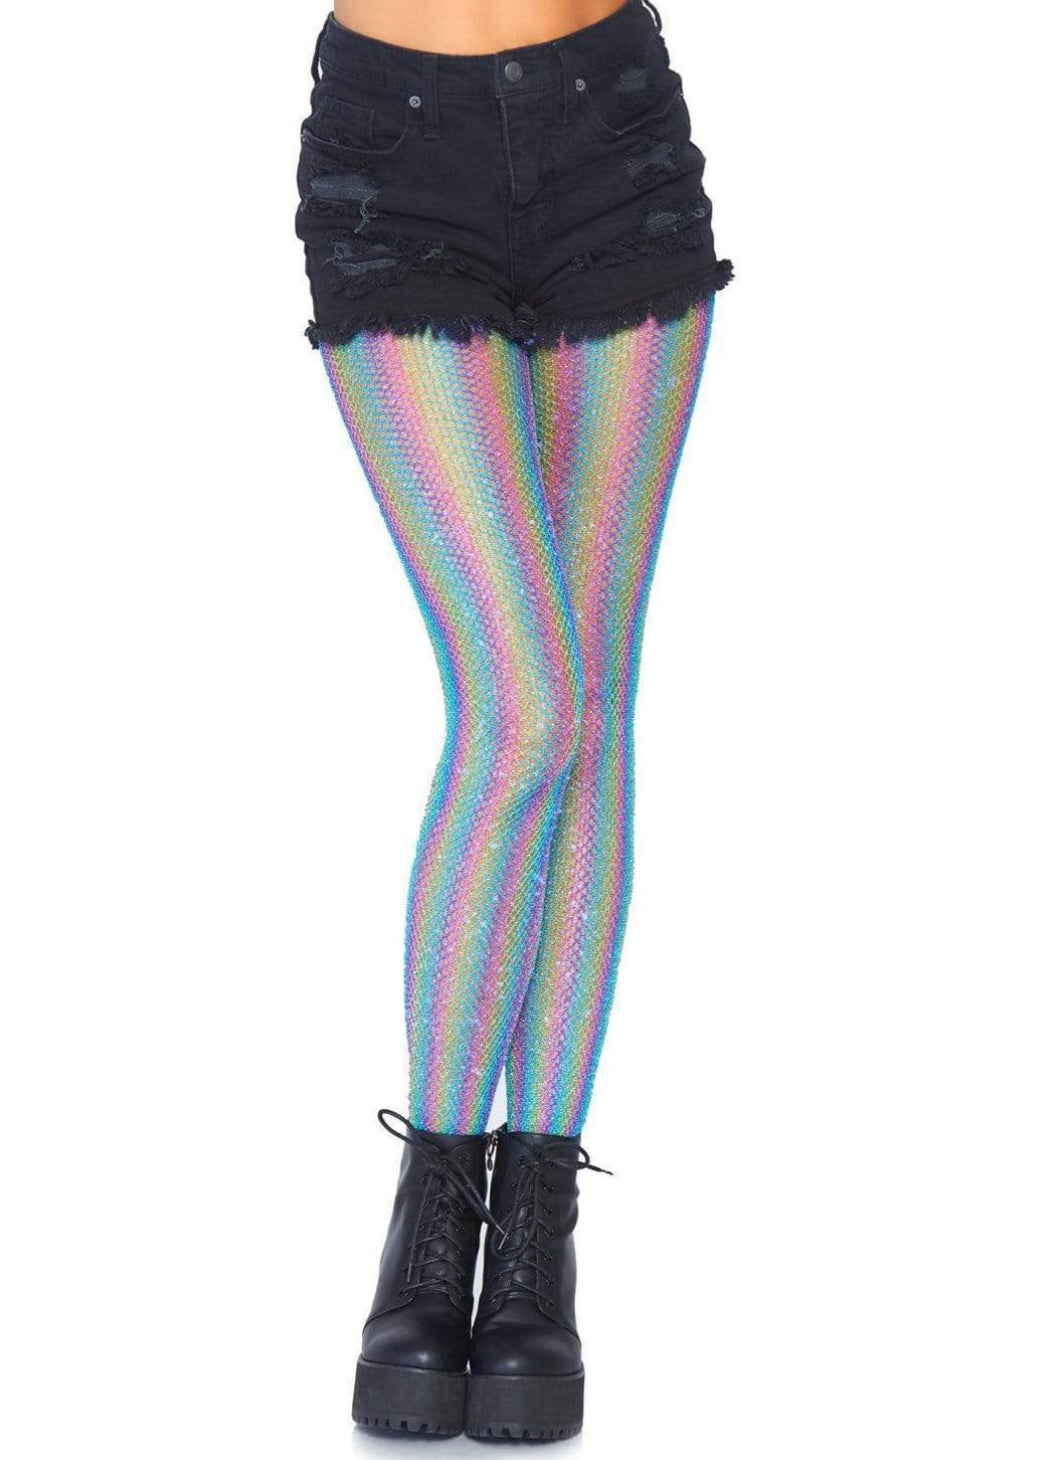 Colored lurex shimmer rainbow striped fishnet tight